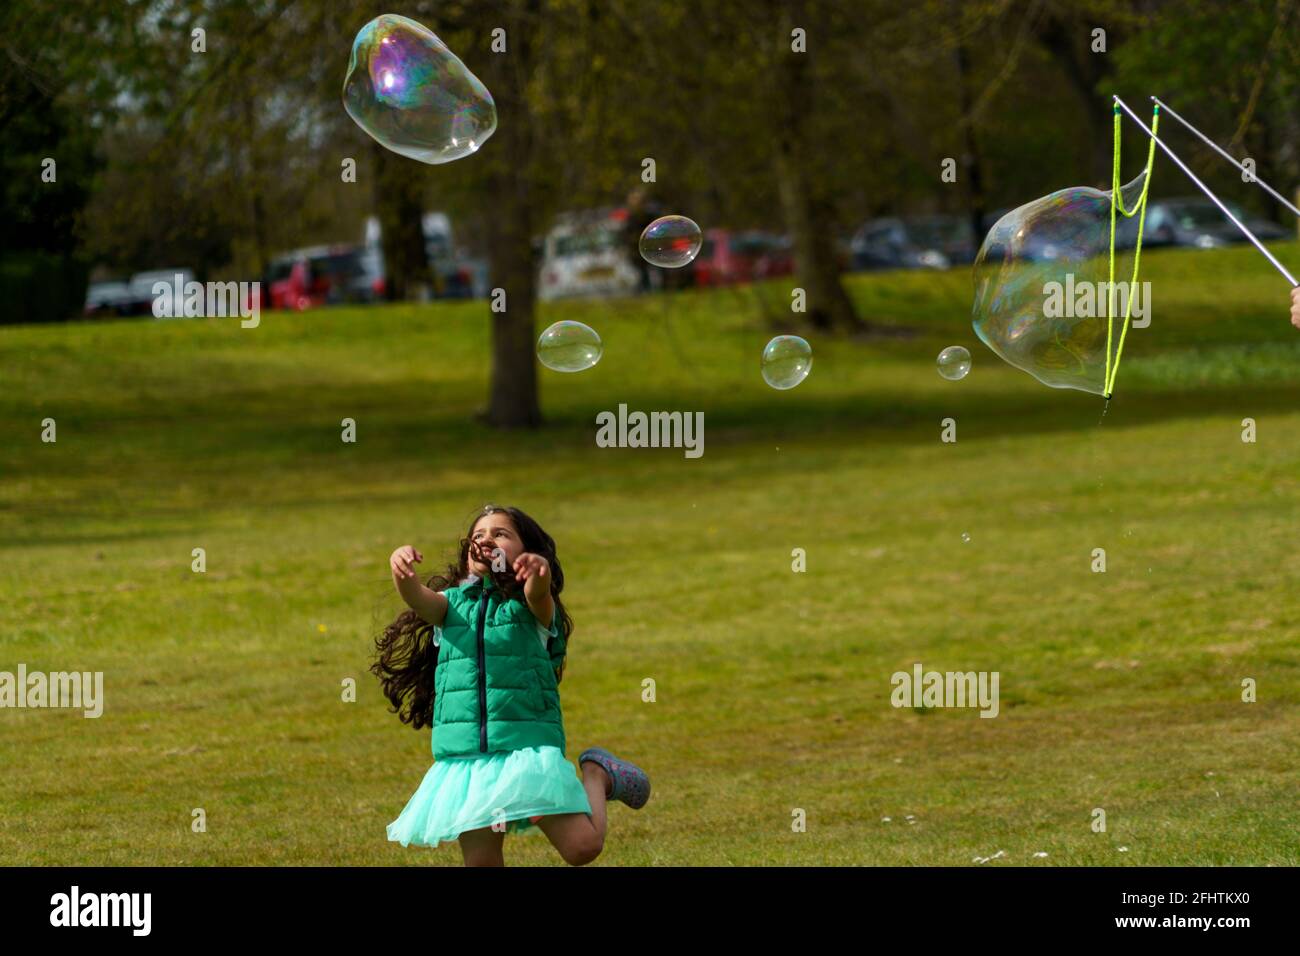 Harrogate park where a young girl is chasing the soapy bubbles created with a Bubble Wand, North Yorkshire, England, UK. Stock Photo